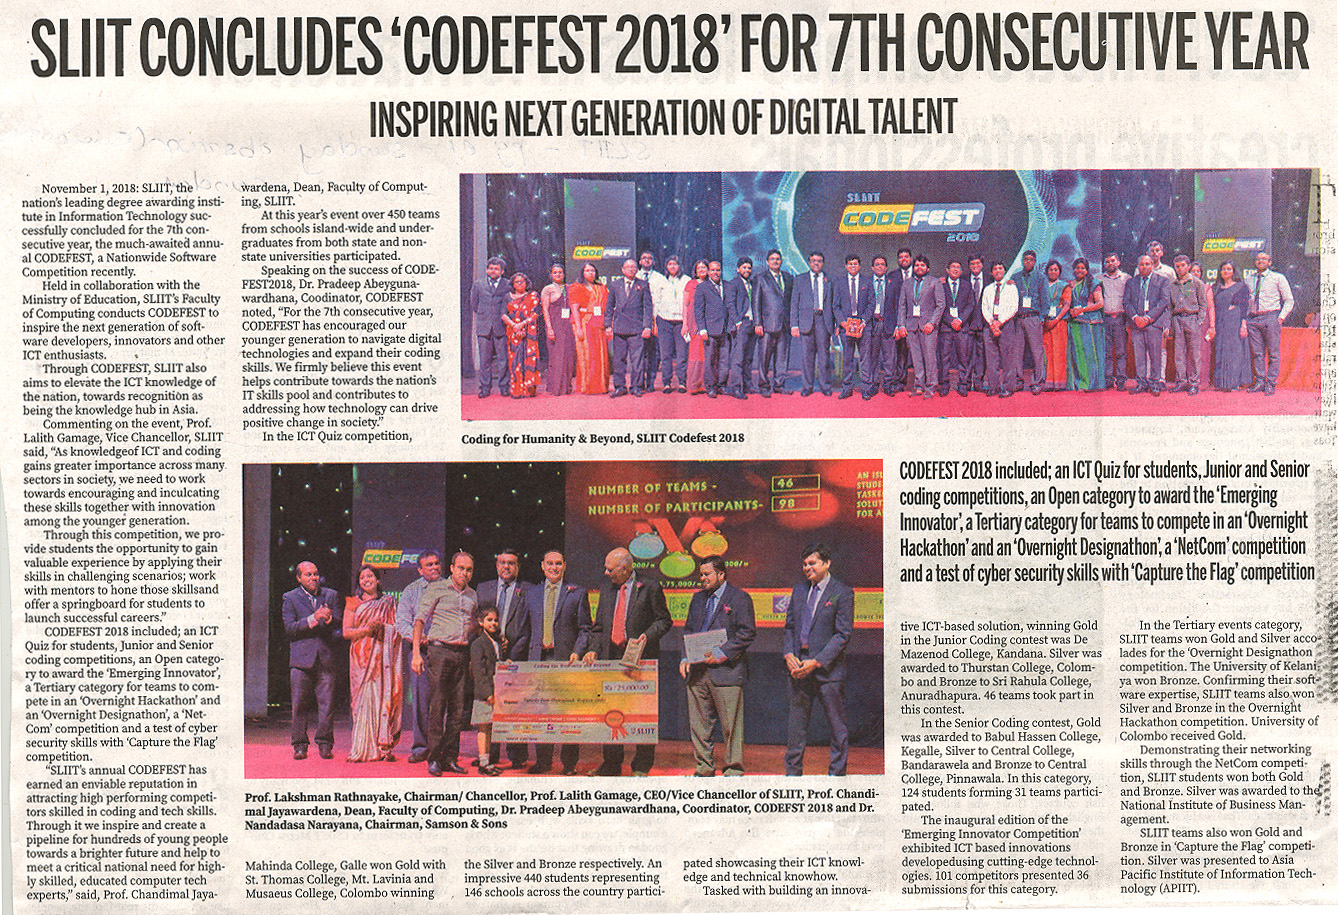 SLIIT-Concludes-CODEFEST-2018-for-7th-Consecutive-Year-Inspiring-Next-Generation-of-Digital-Talent-Sunday-Observer-04-11-2018